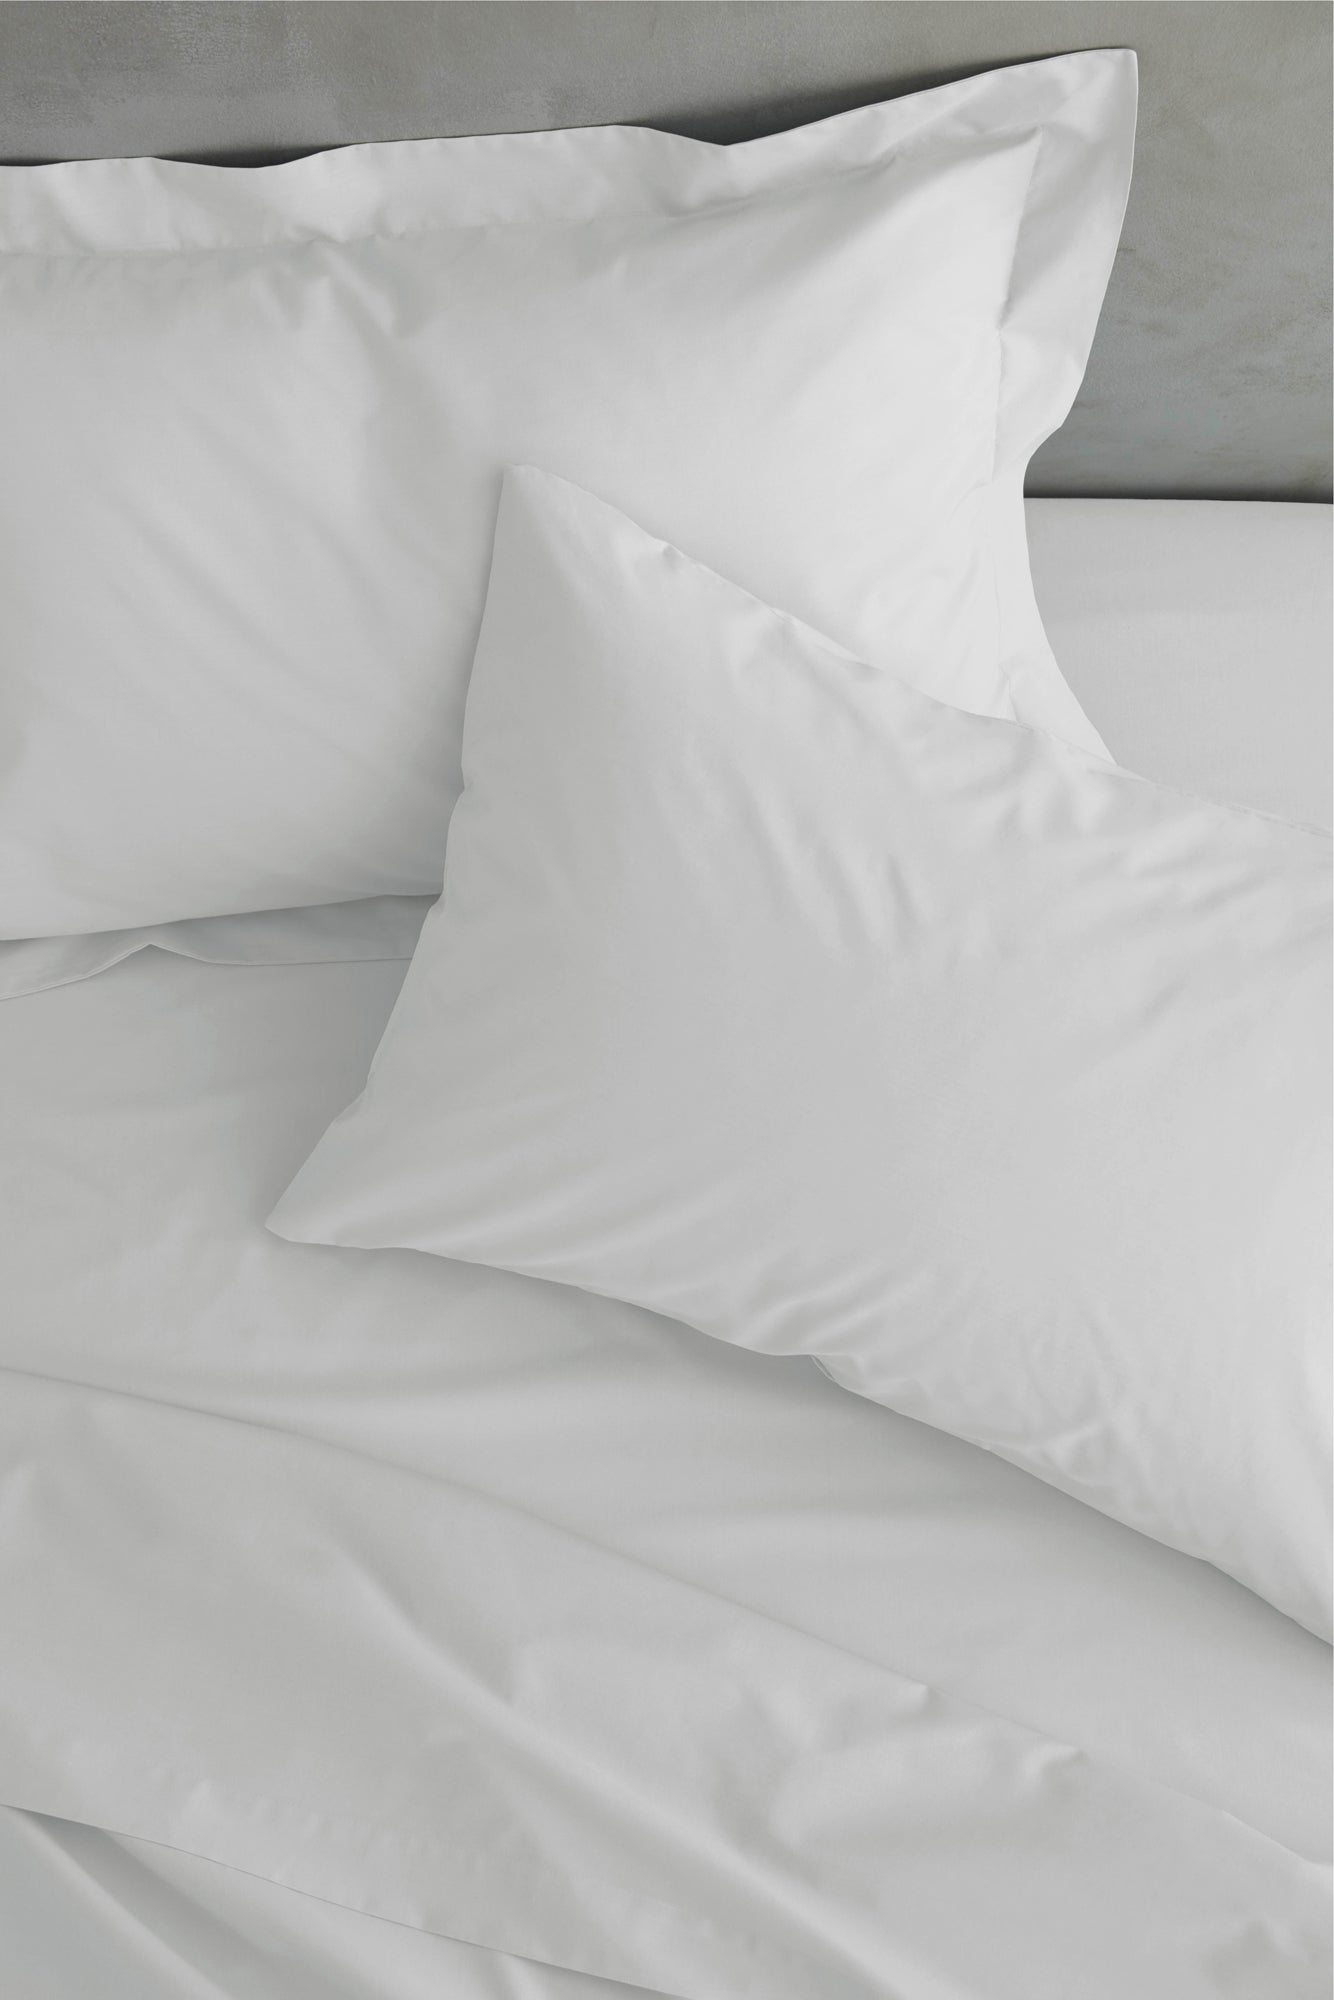 Catherine Lansfield White Easy Iron Percale (25cm) Fitted Sheet